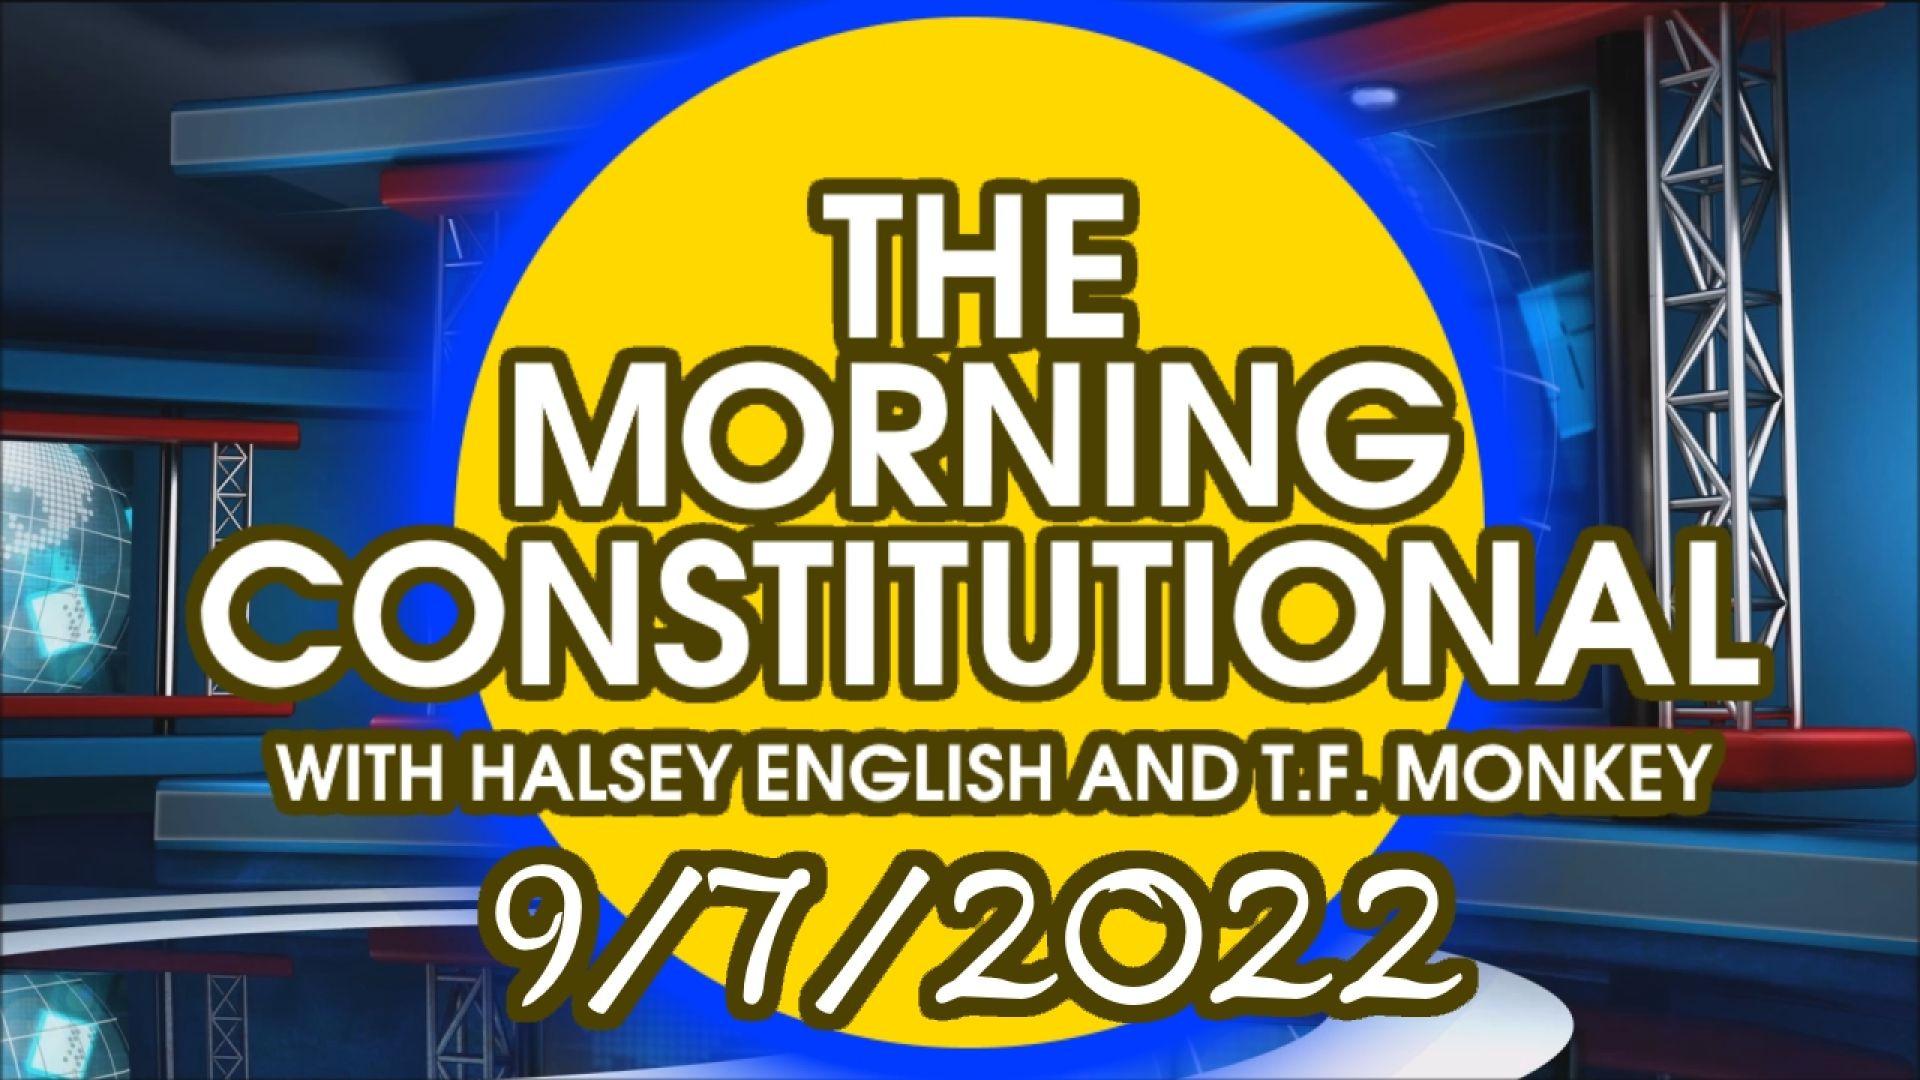 The Morning Constitutional: 9/7/2022